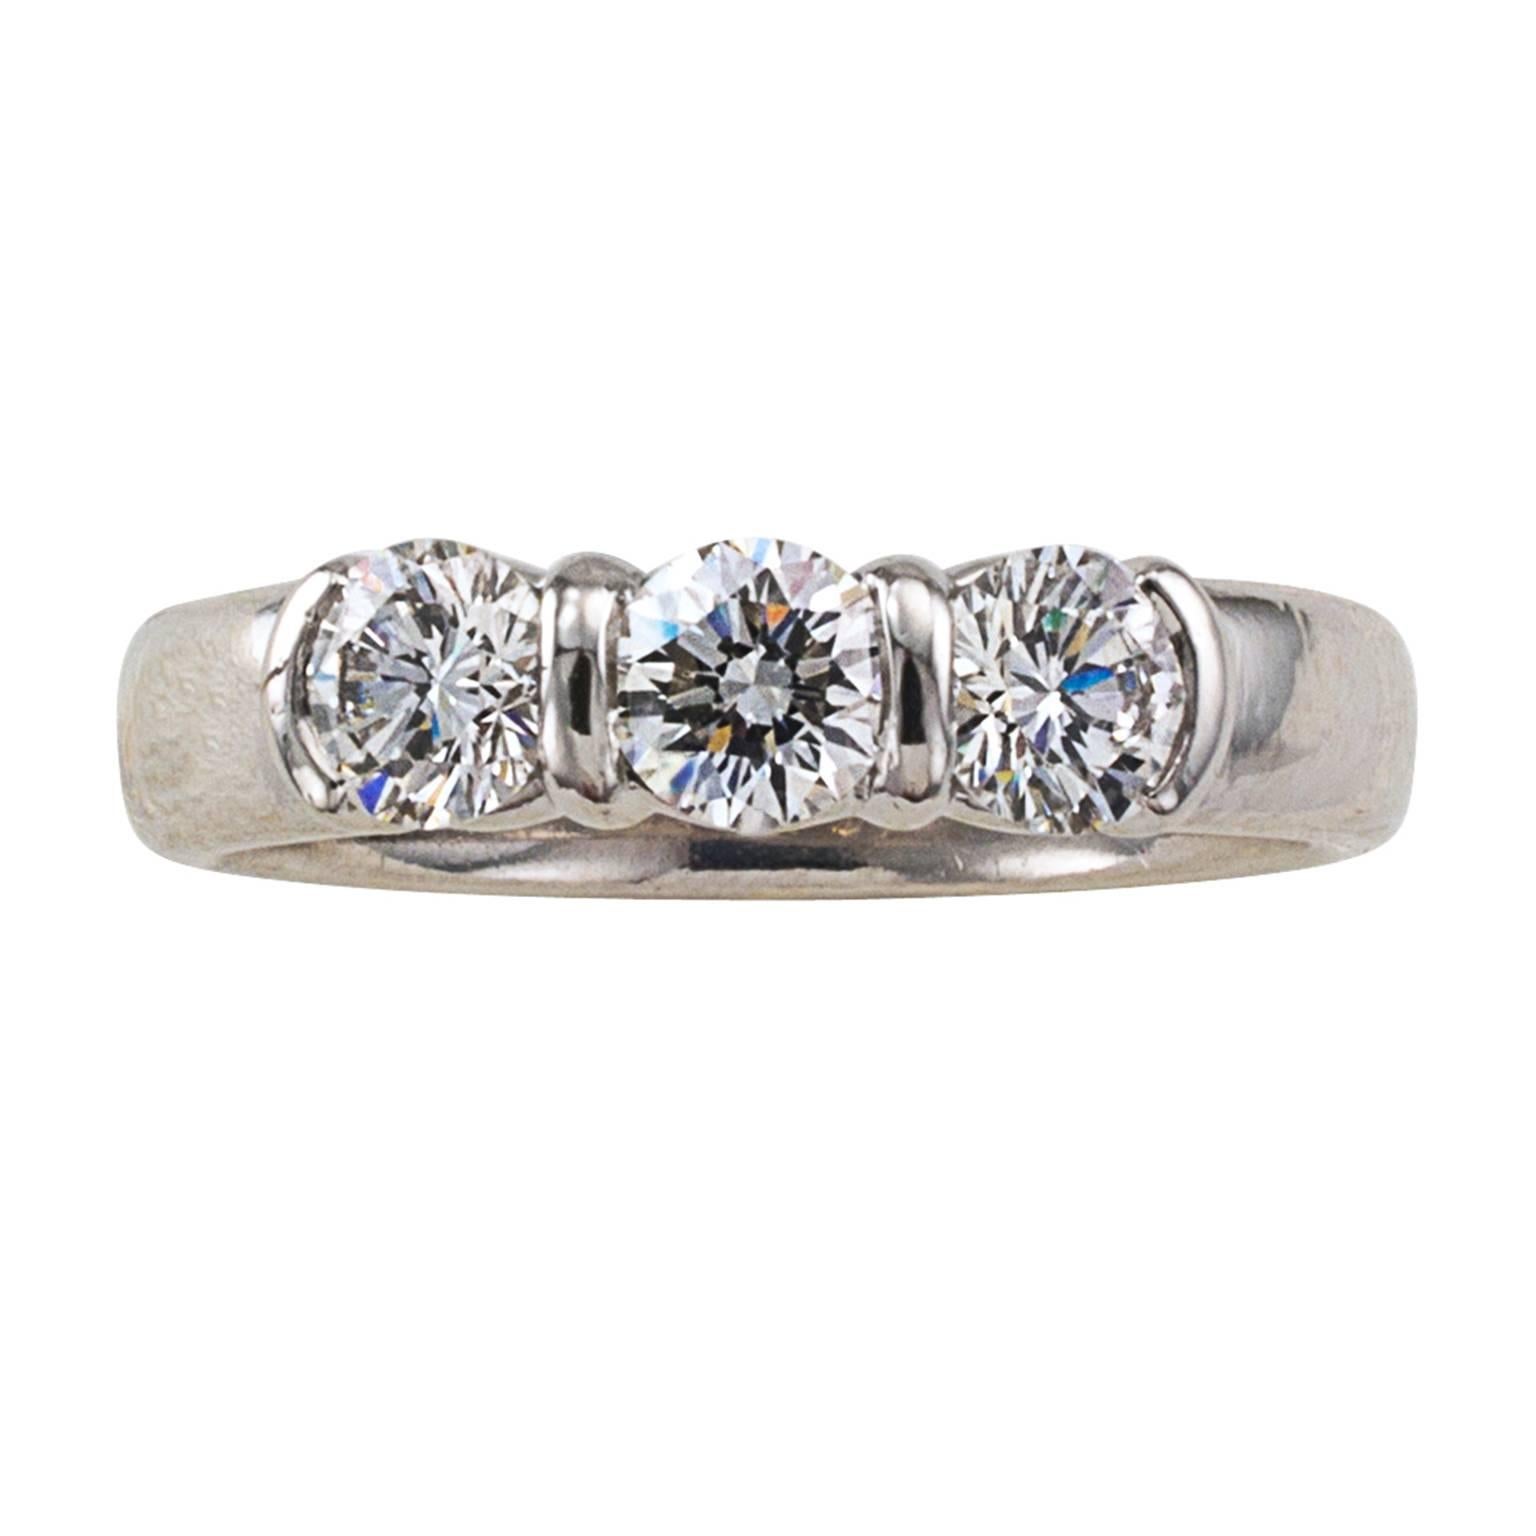 Tiffany and Company Estate Three Stone Diamond Ring

Tiffany and Company's contemporary three stone ring has all the characteristics classic styling and timeless beauty, the three round brilliant-cut diamonds together totaling approximately 0.85